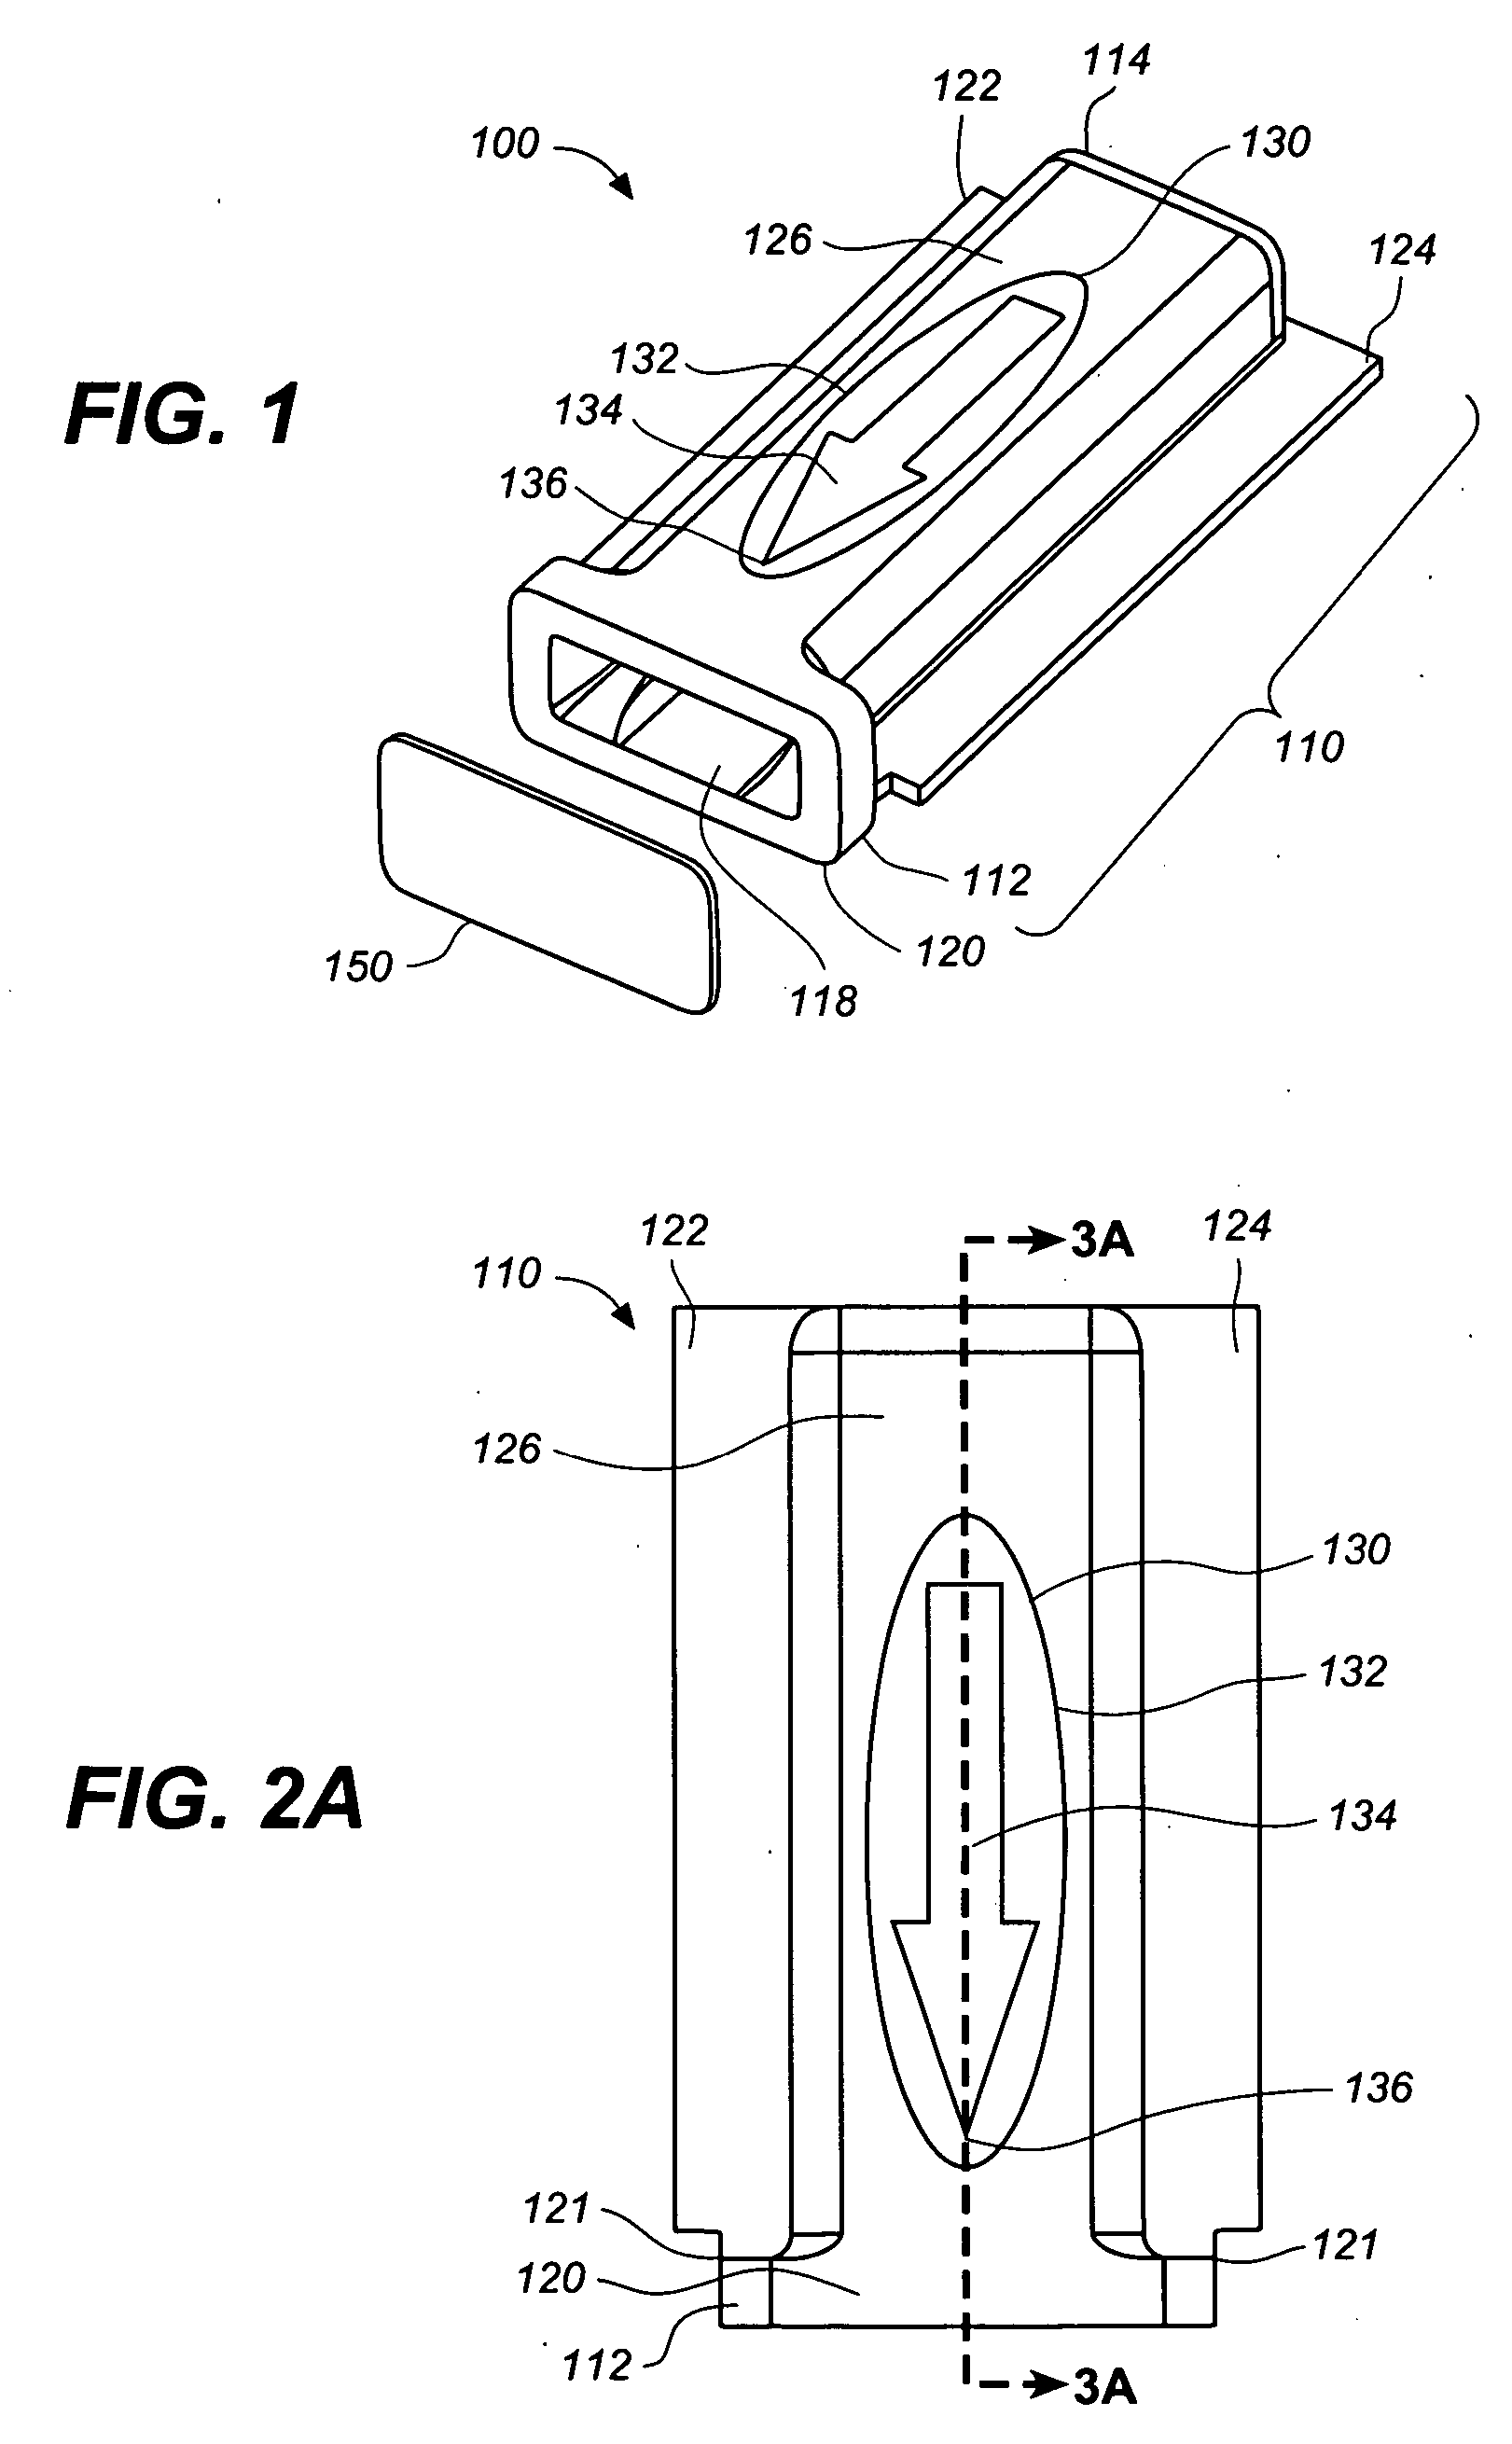 Method for extracting a medical device from a medical device package